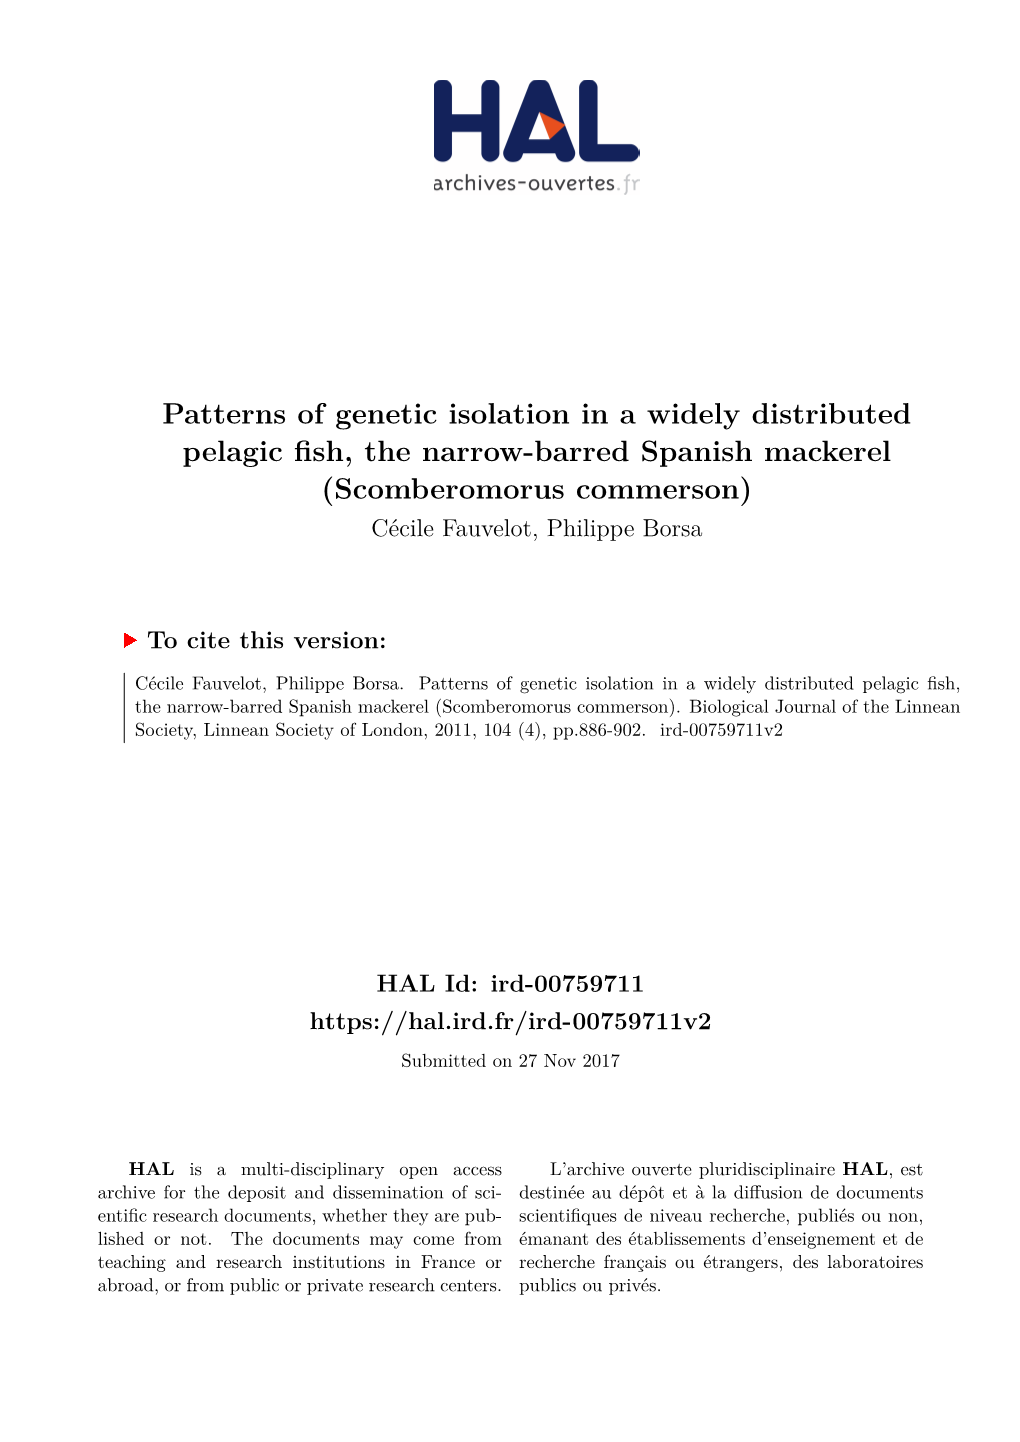 Patterns of Genetic Isolation in a Widely Distributed Pelagic Fish, the Narrow-Barred Spanish Mackerel (Scomberomorus Commerson) Cécile Fauvelot, Philippe Borsa